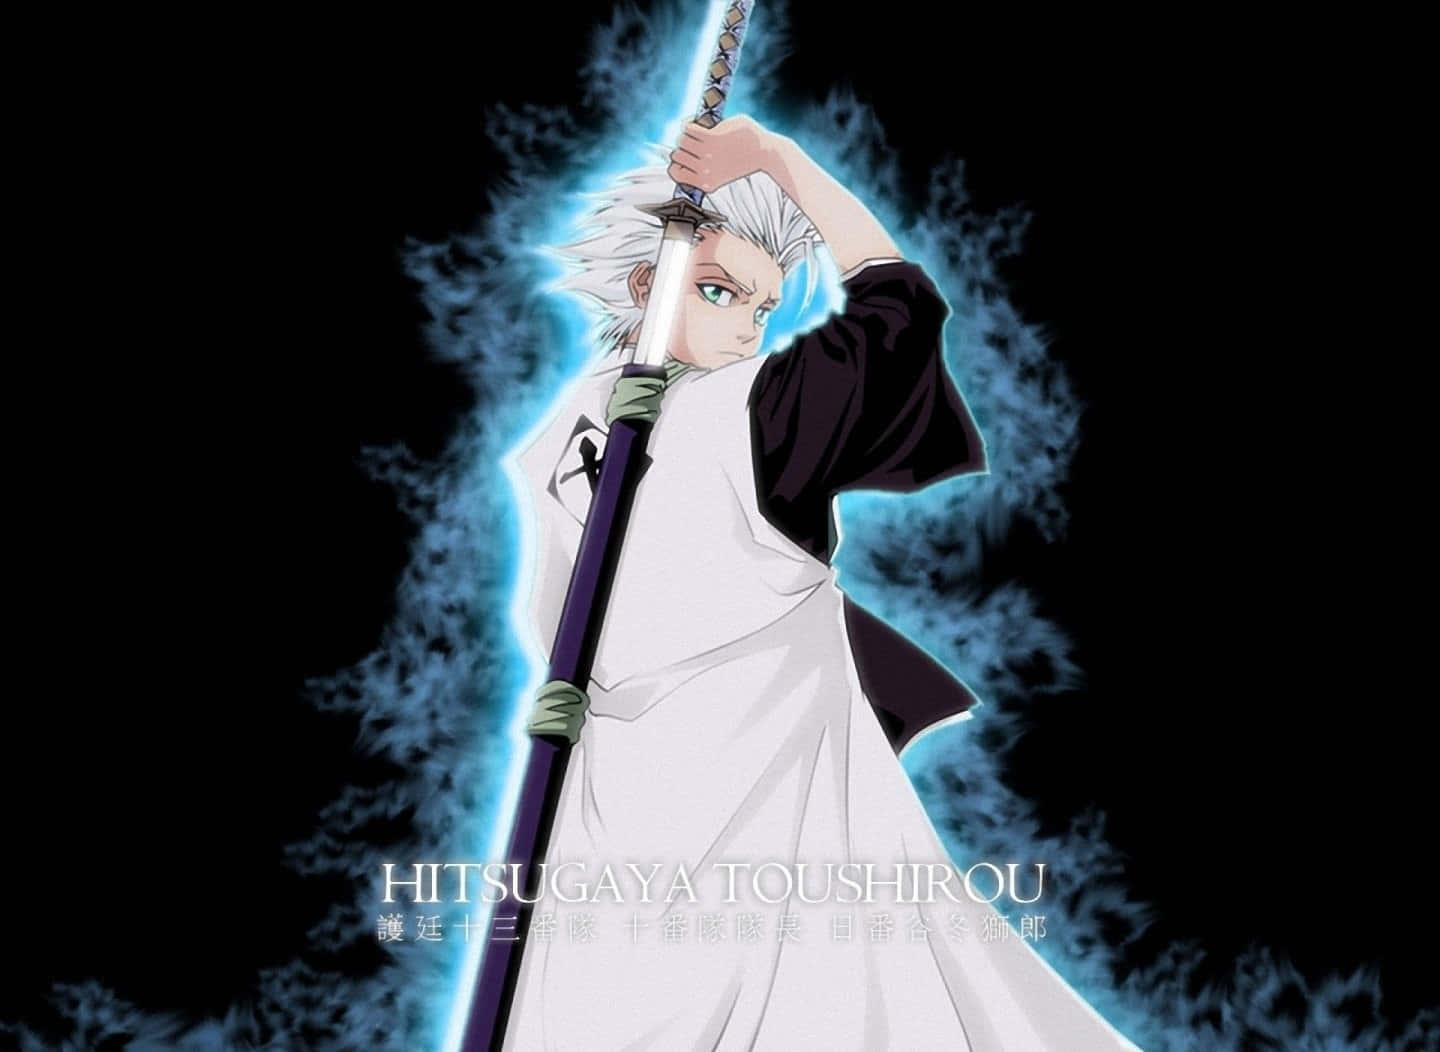 Toshiro Hitsugaya, The Youngest Captain In The Gotei 13. Background